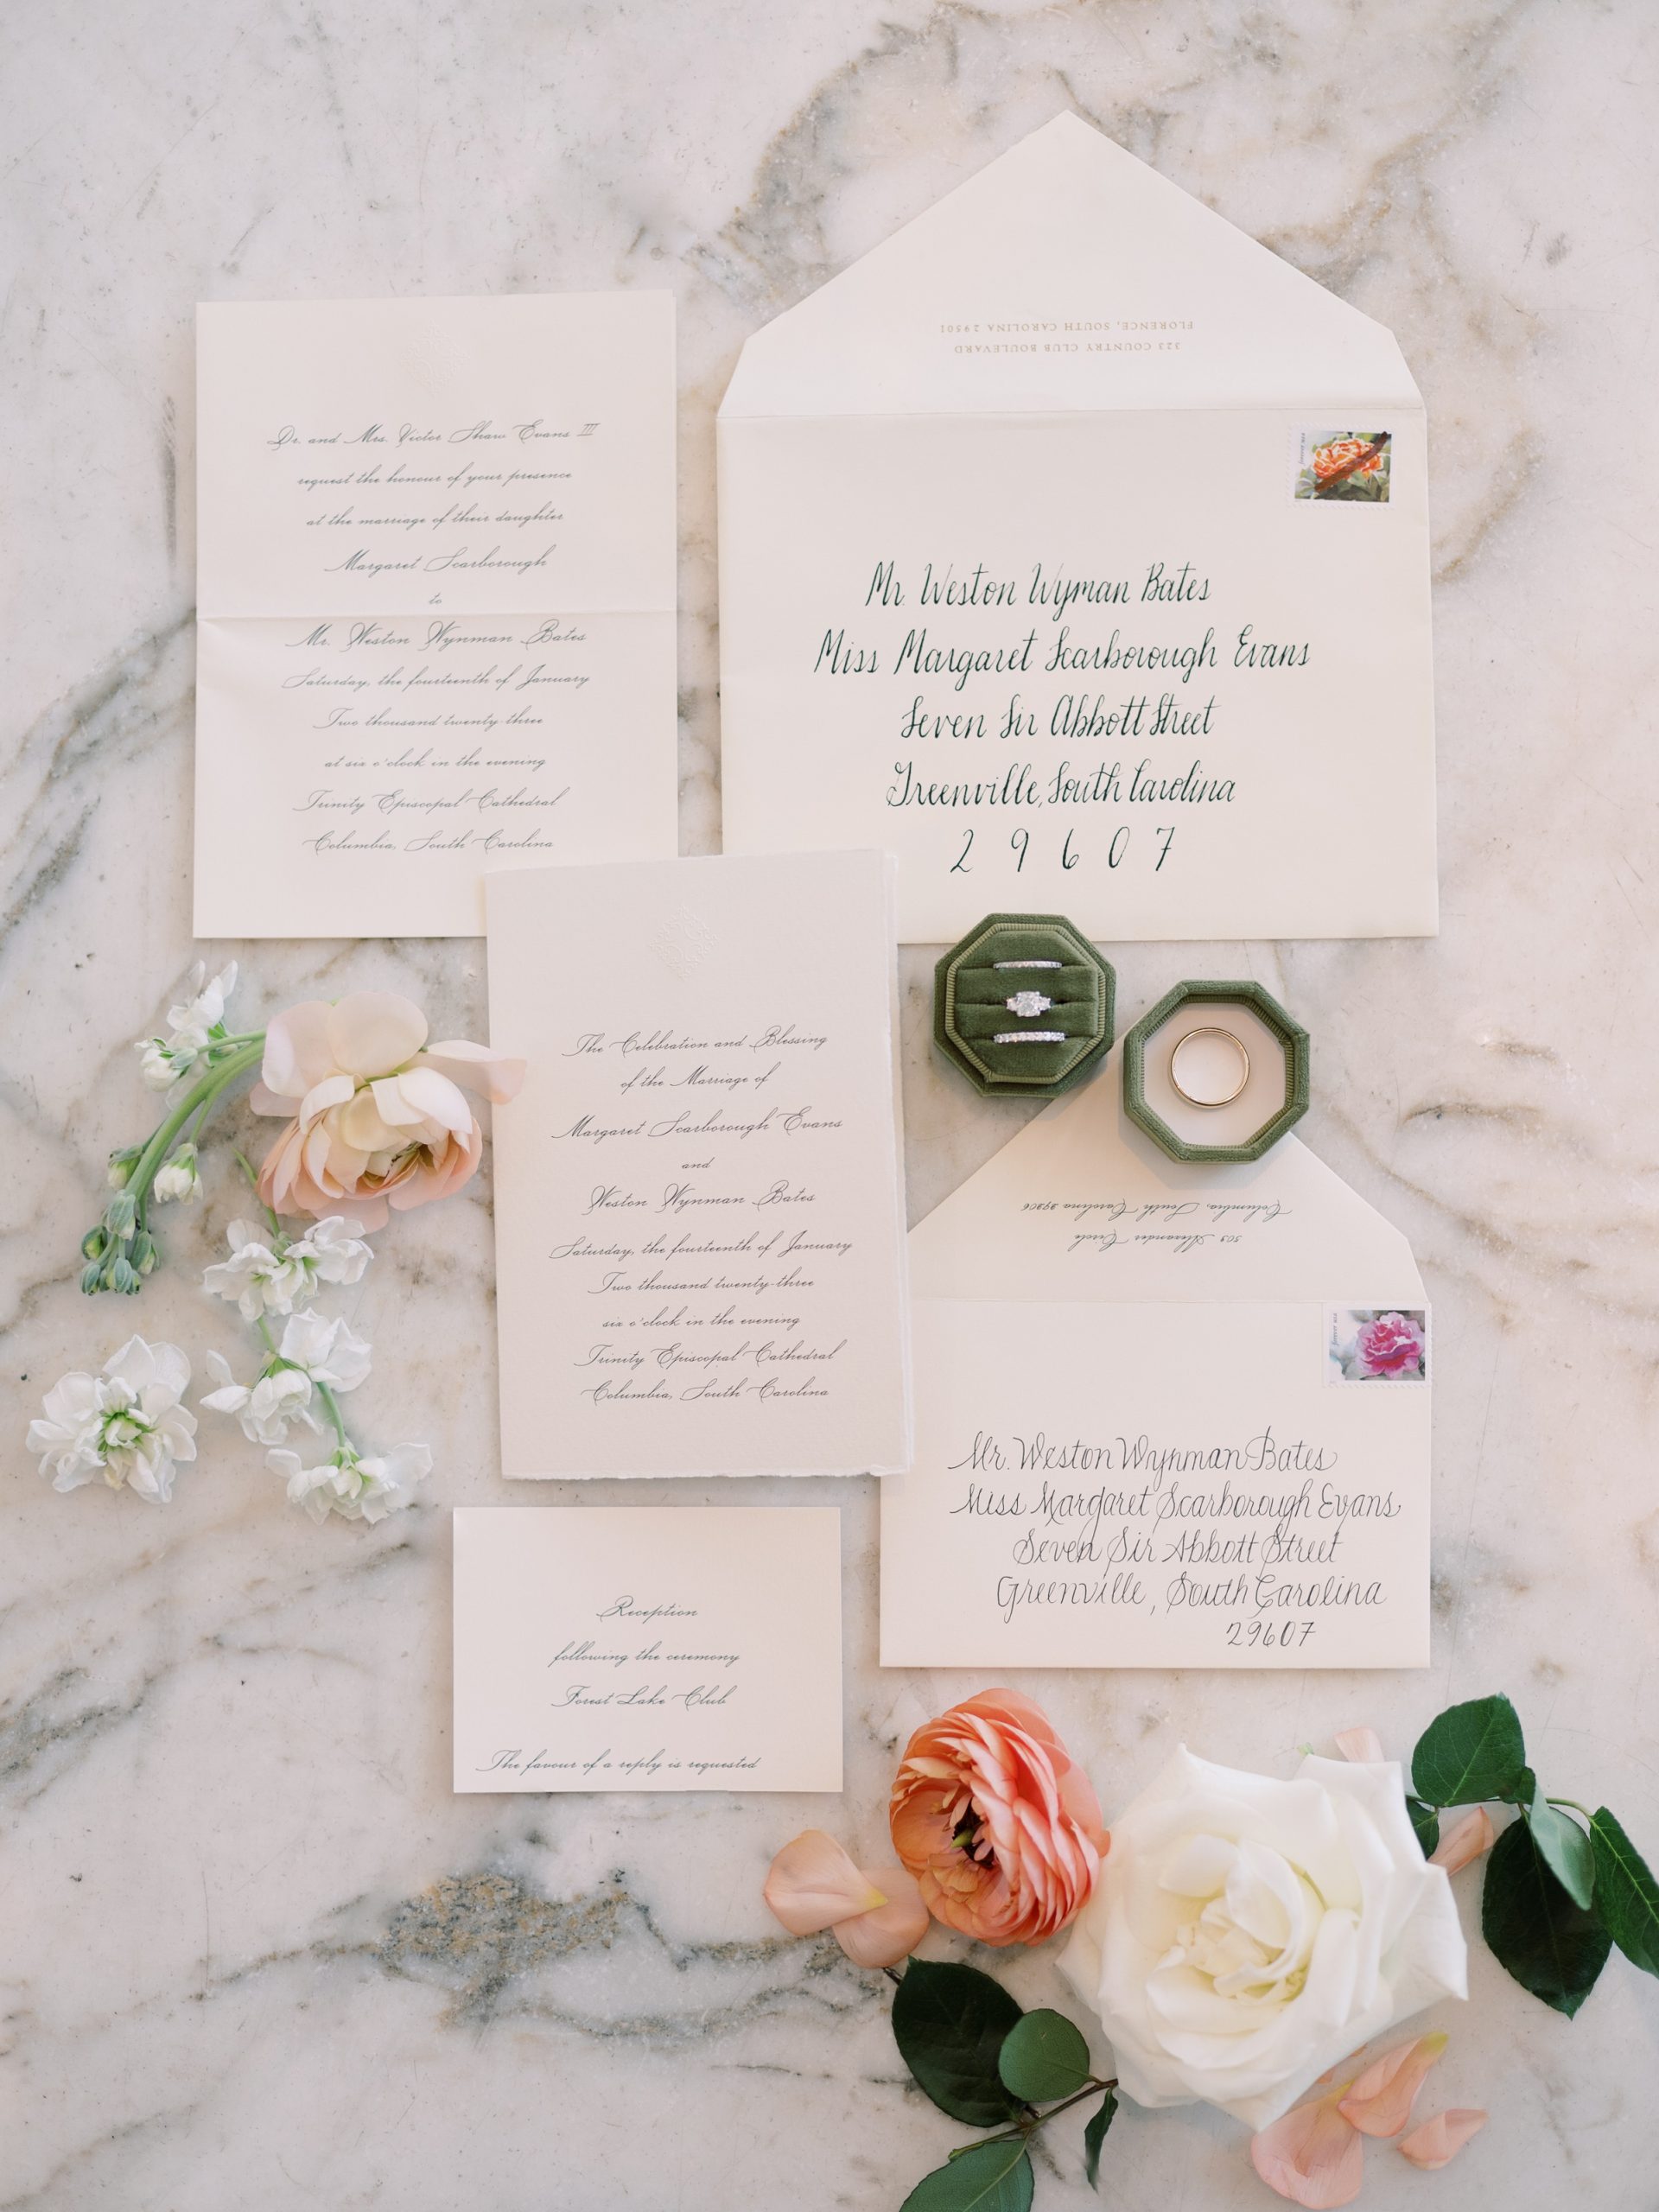 After growing up going to Trinity Cathedral and Forest Lake Club, Meg’s venues were obvious choices. Martha Morris provided the traditional invitations double-folded and engraved with the Trinity cross blind engraved at the top.